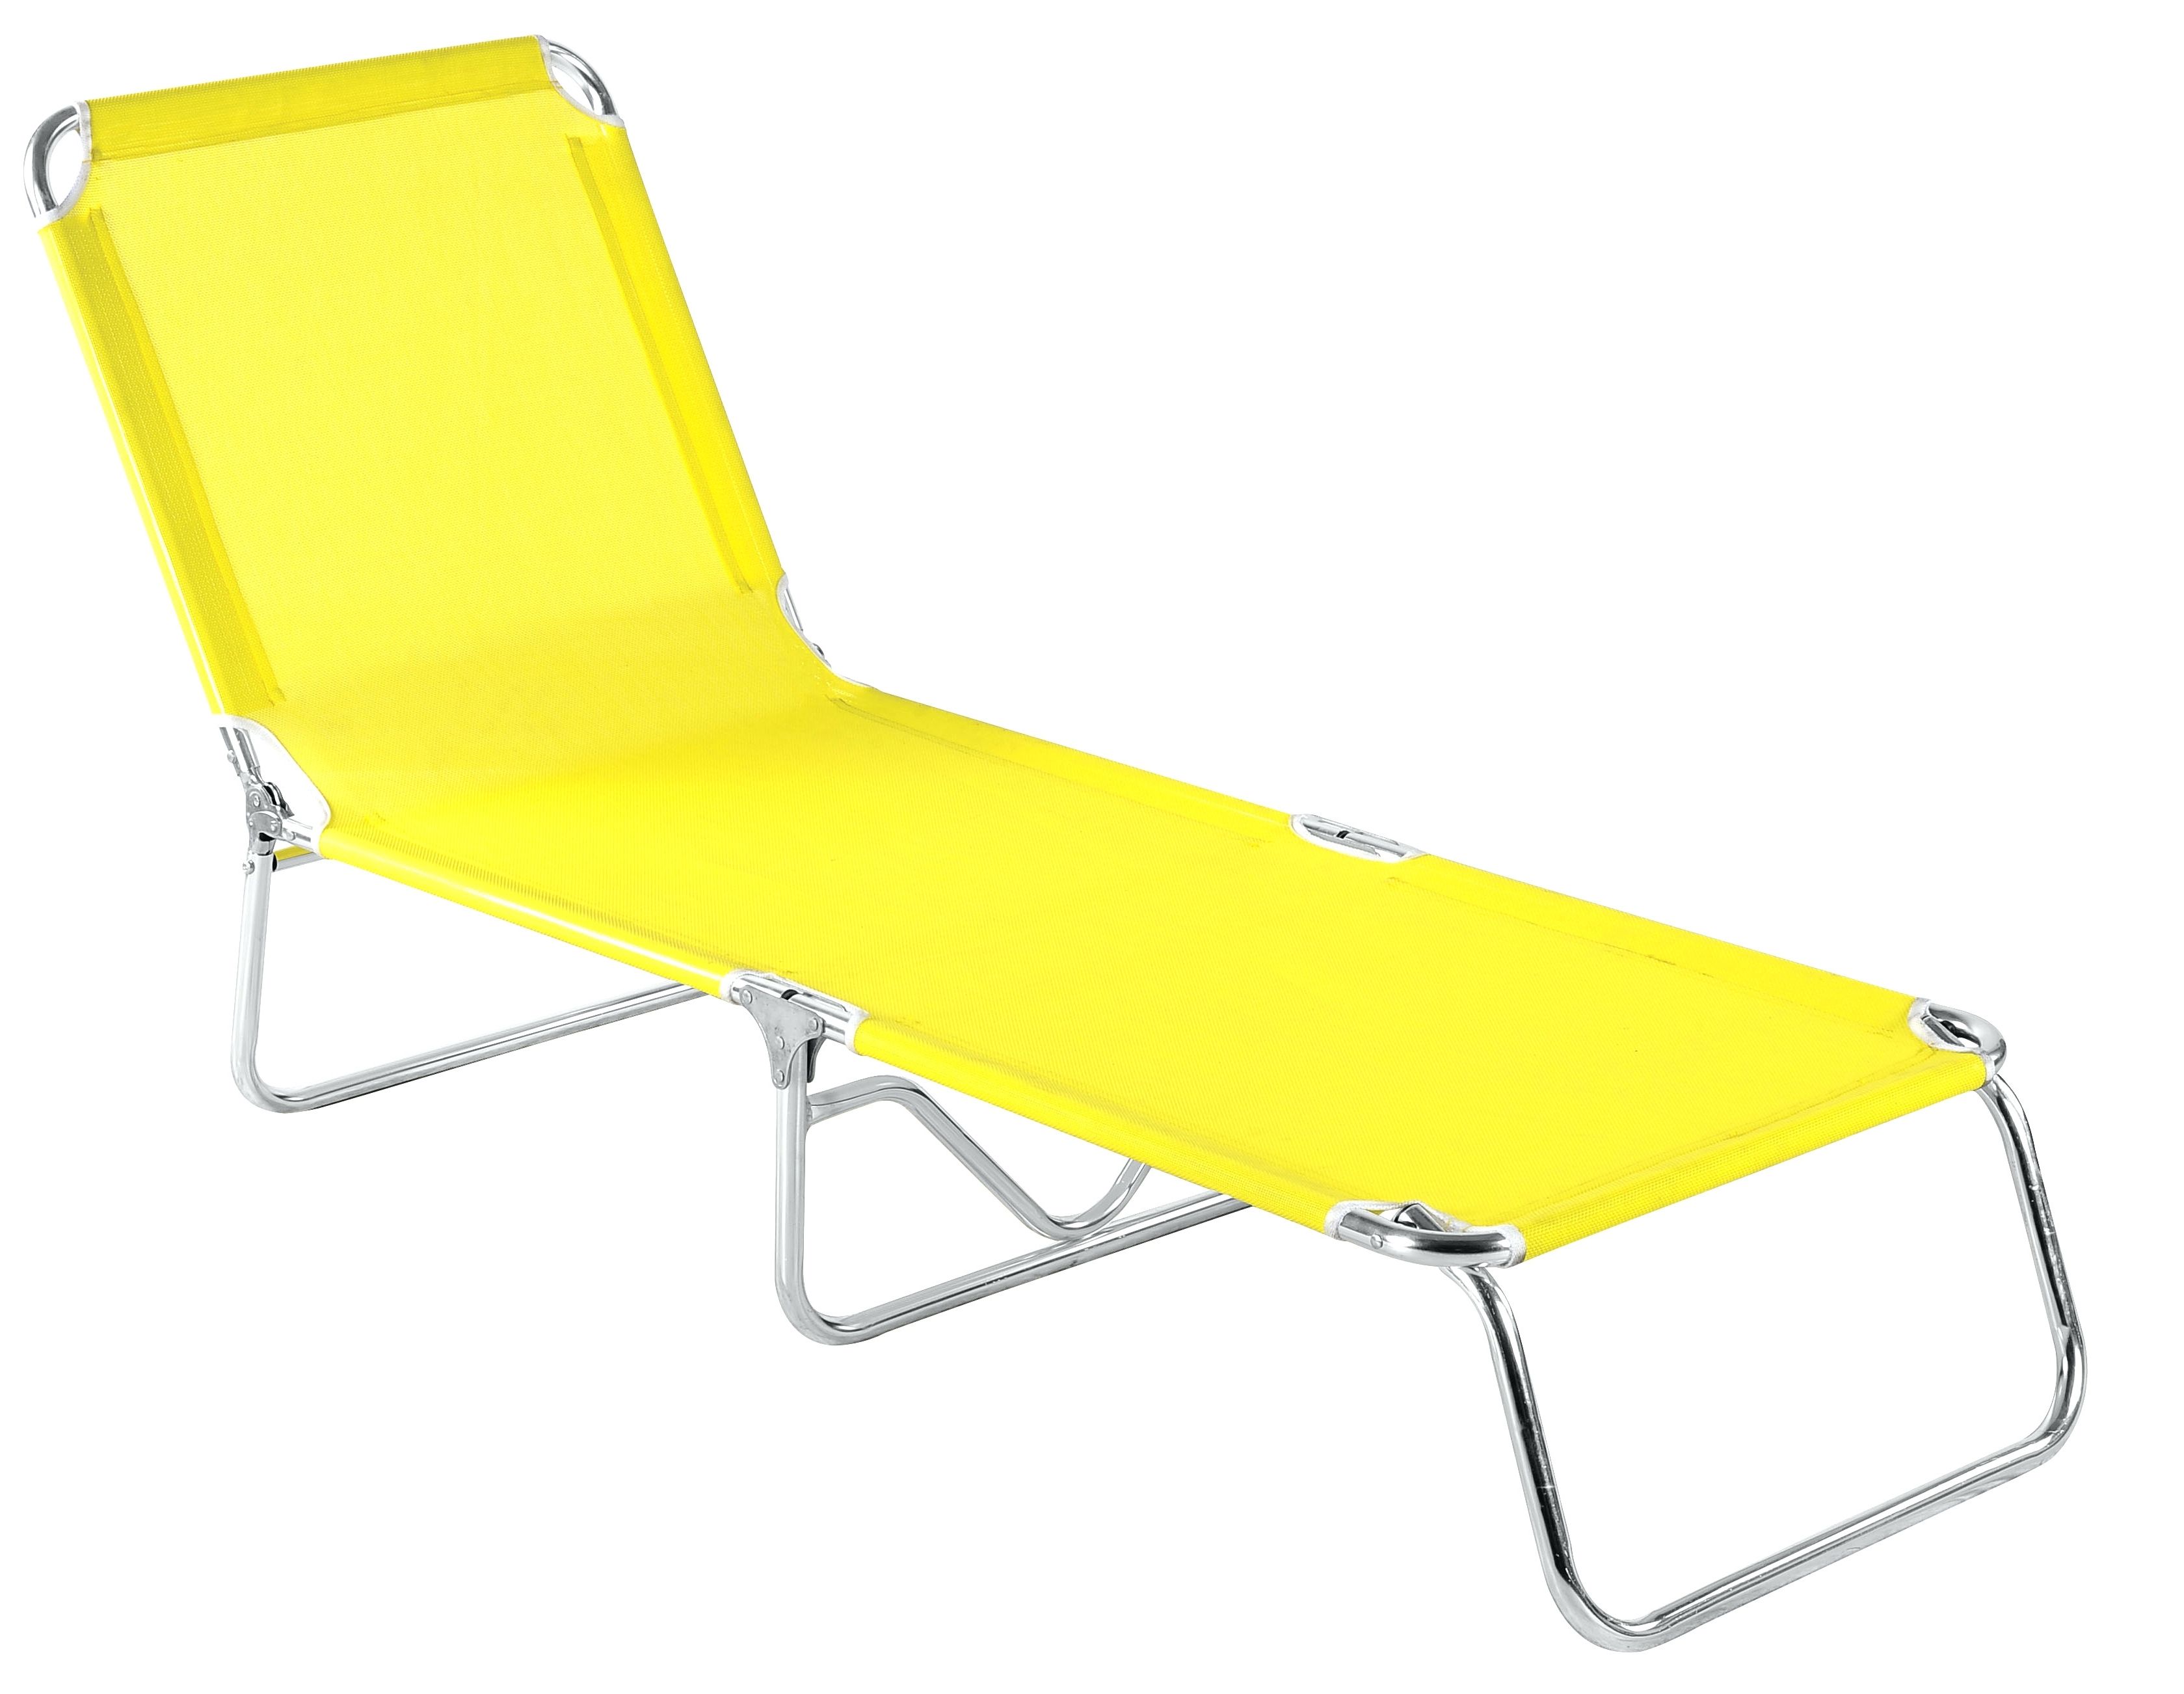 Heavy Duty Outdoor Chaise Lounge Chair • Lounge Chairs Ideas With Well Liked Heavy Duty Outdoor Chaise Lounge Chairs (View 2 of 15)